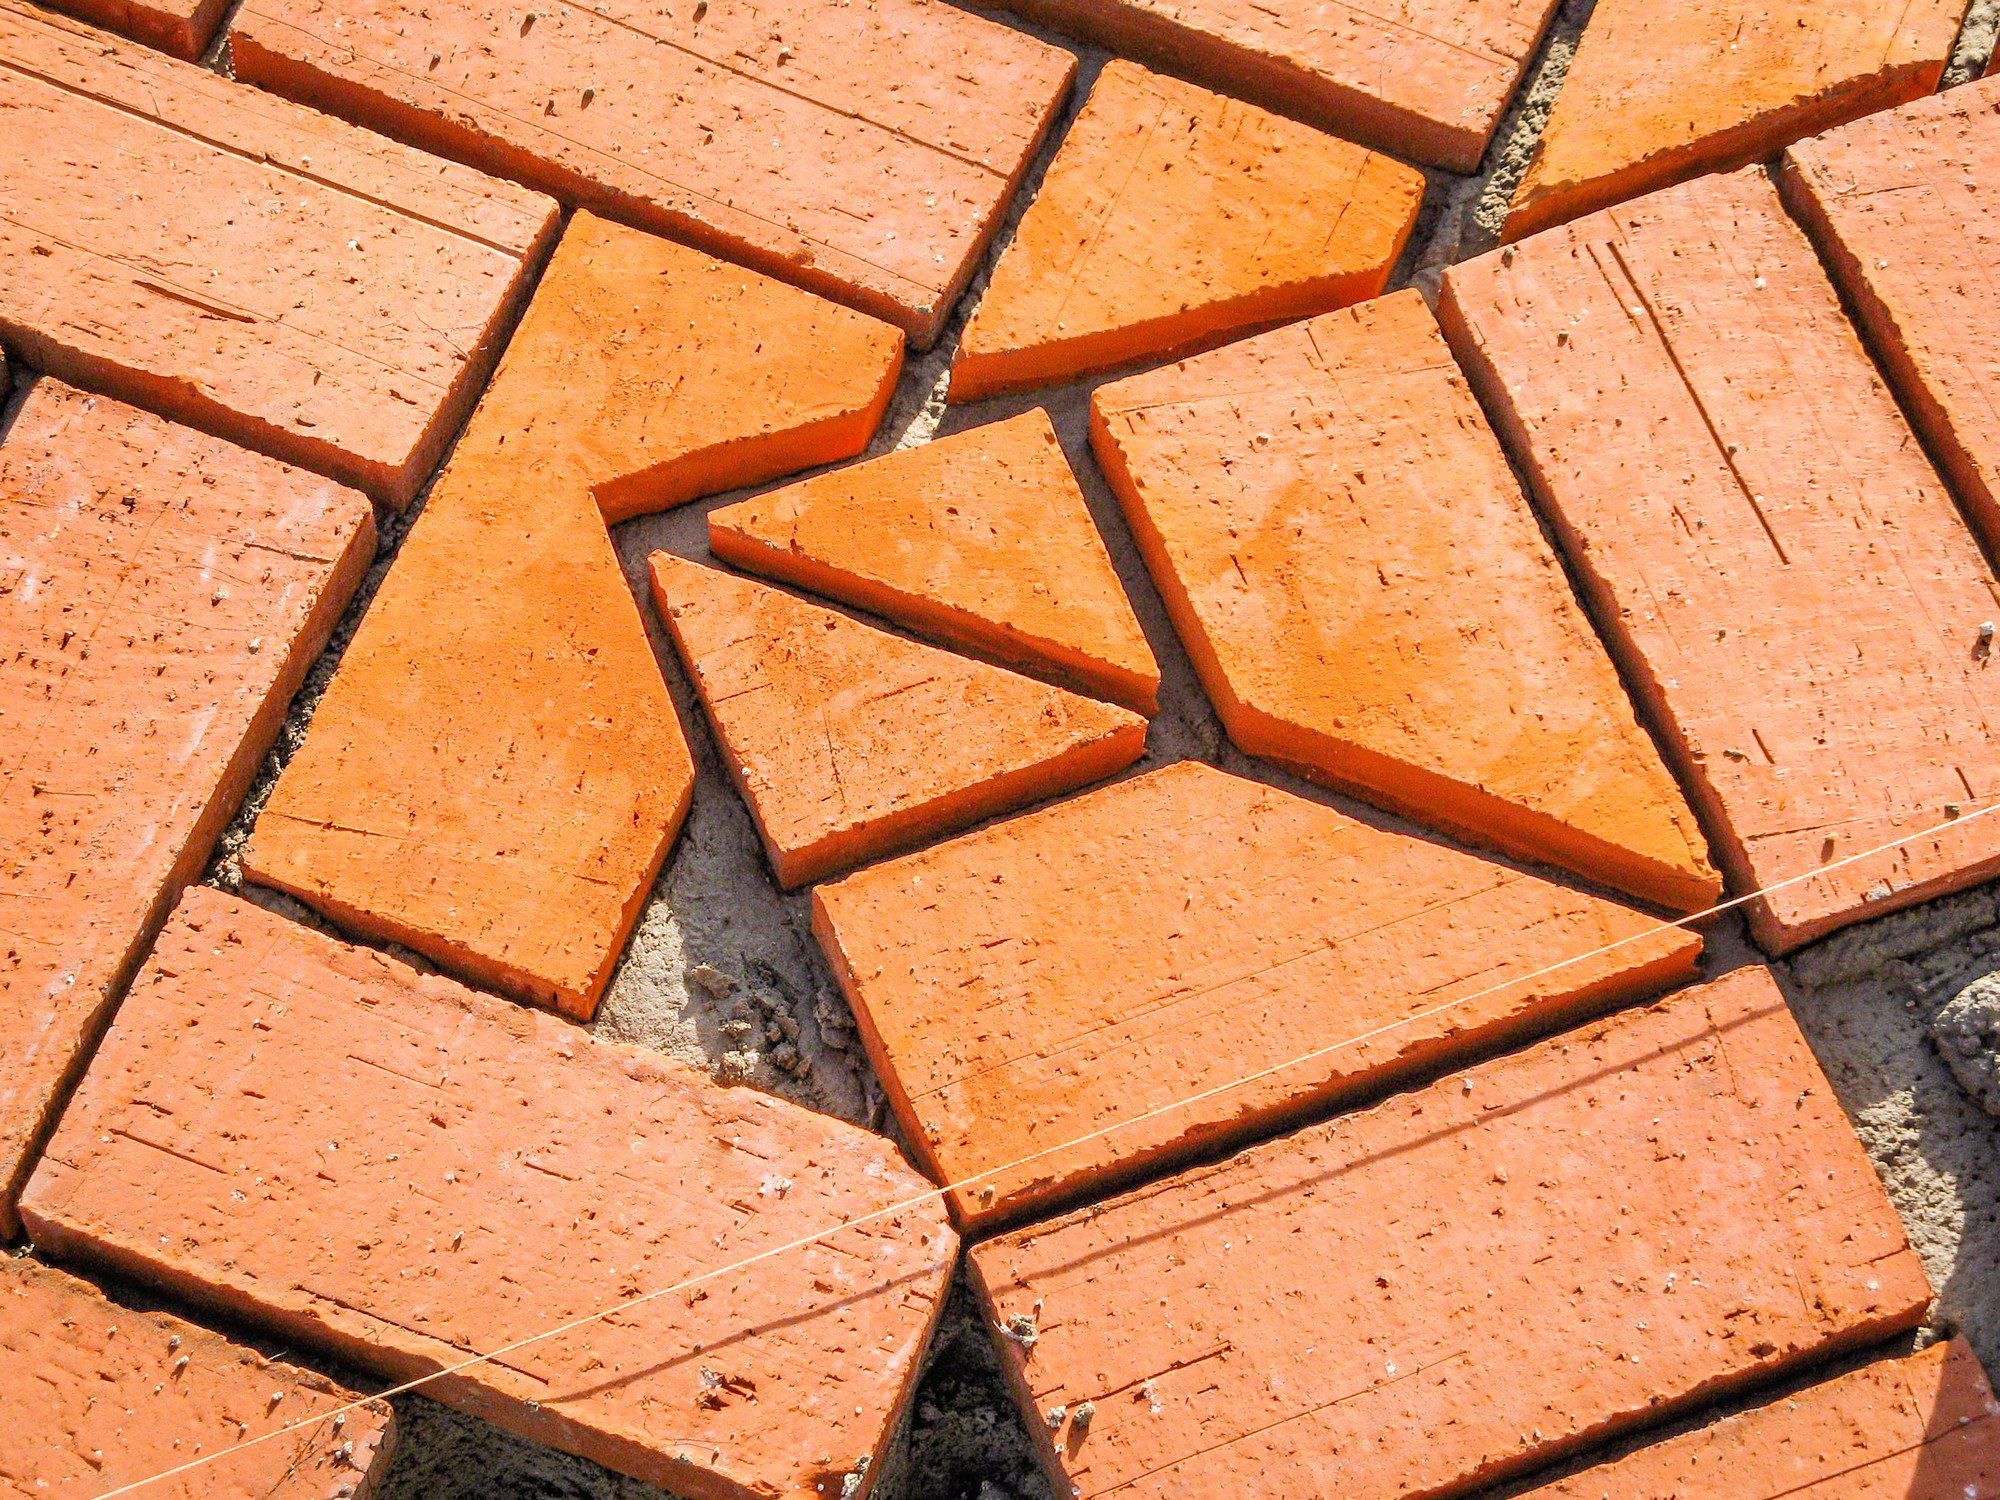 This is an image showing a number of red bricks that are scattered and not laid in a structured or completed pattern. Some bricks appear to be partially embedded in a gray substrate, which might be concrete or mortar, and thin lines of what looks like string lines are visible on the surface, possibly used to align the bricks during the process of paving or constructing a pathway, patio, or brick wall. The image captures the texture and colour of the bricks, highlighting the sense of an unfinished or in-progress brick laying project.